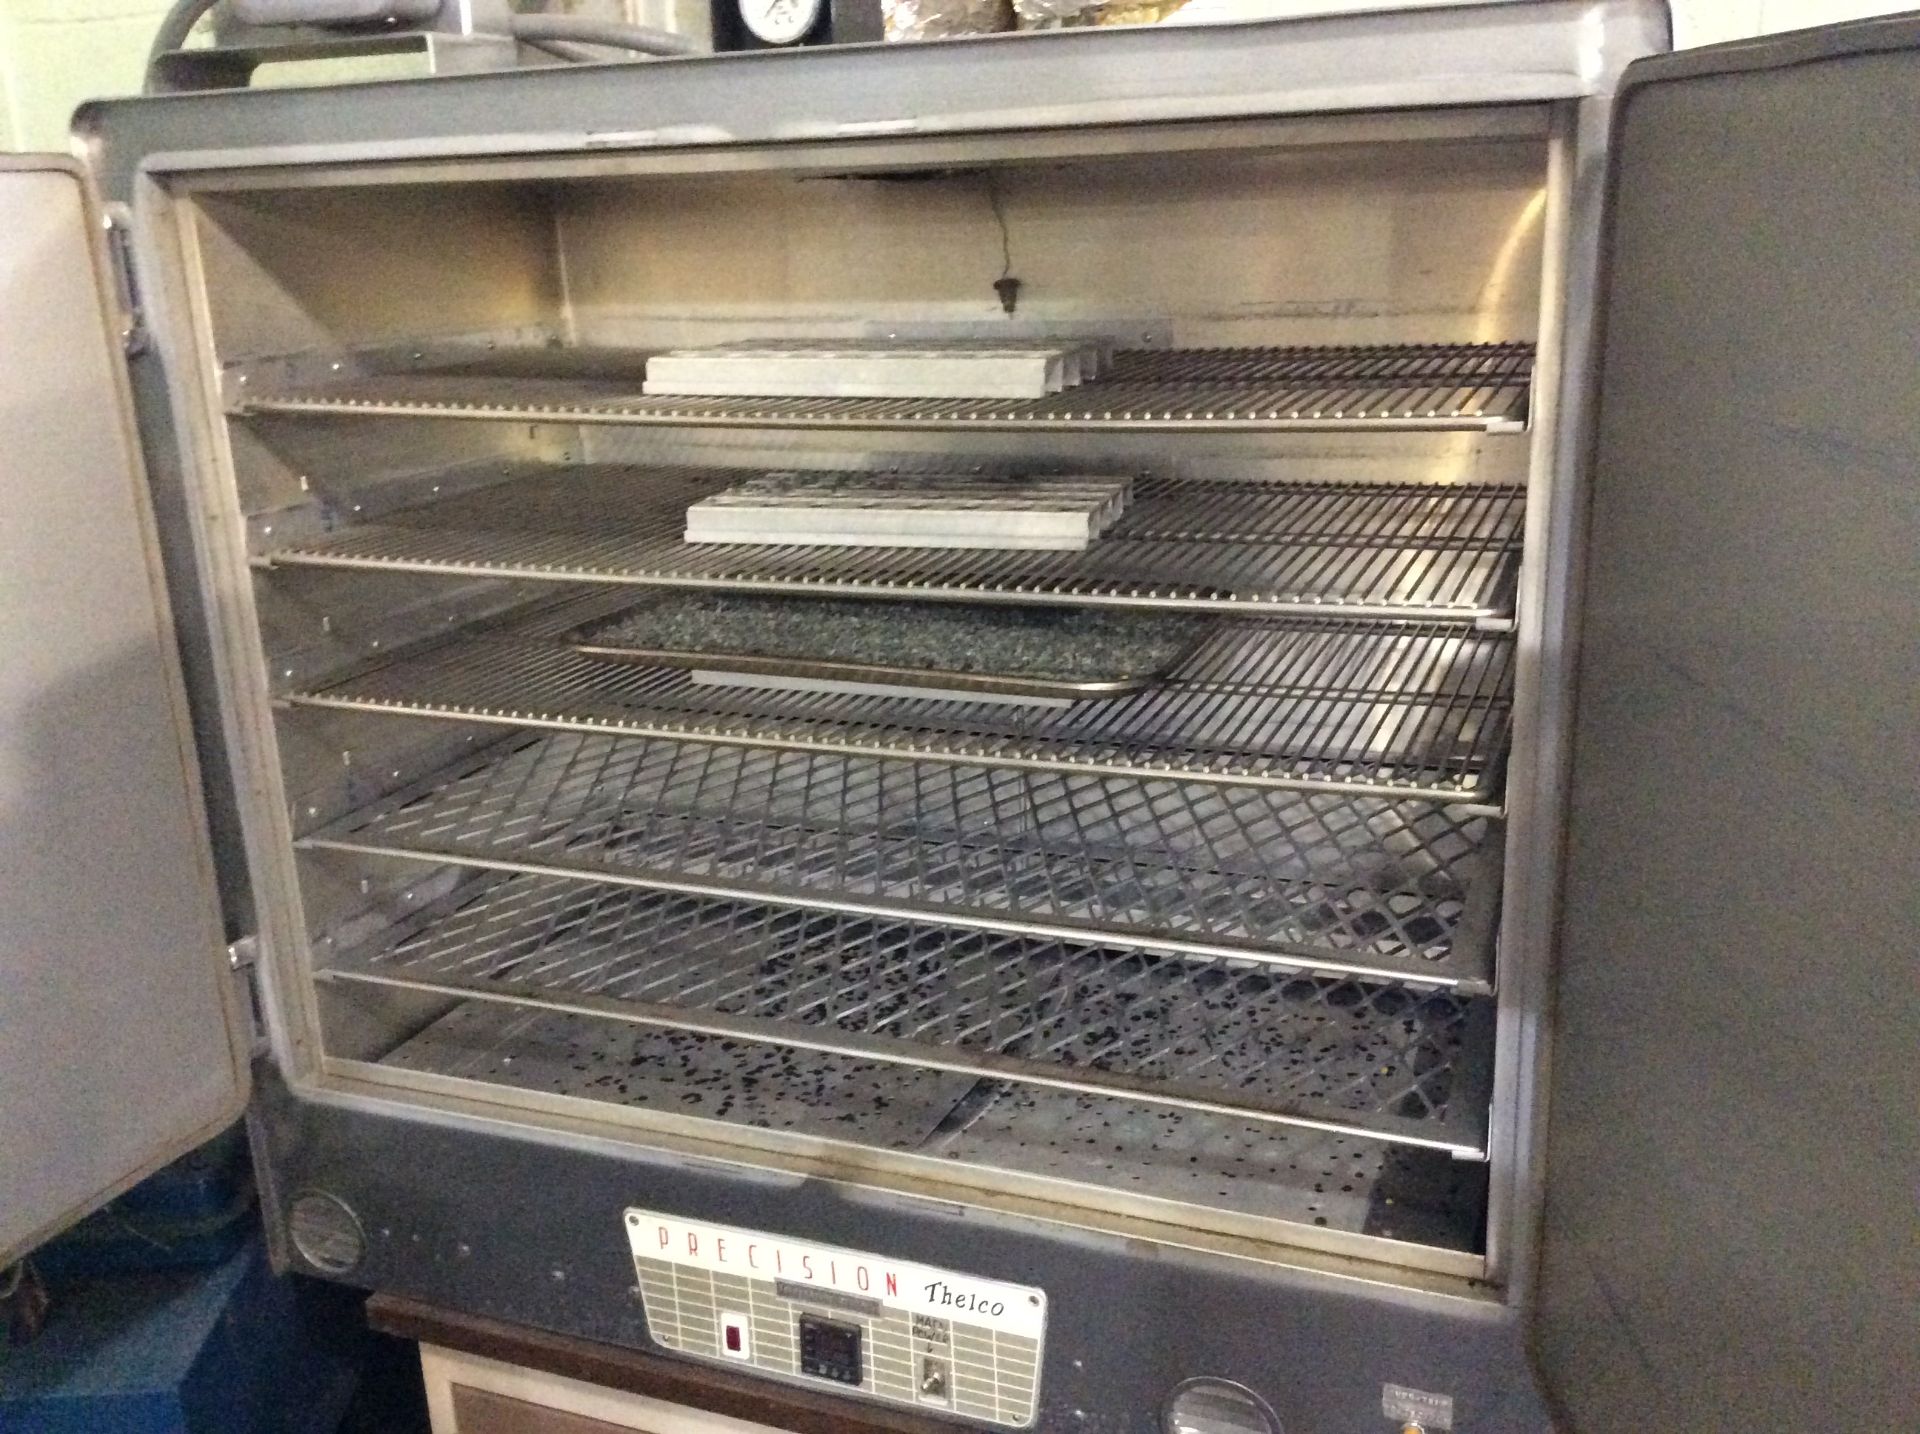 Precision Electric Oven, Estimated 200 Degrees, 36 In. X 27 In. X 18 In Chamber - Image 3 of 4